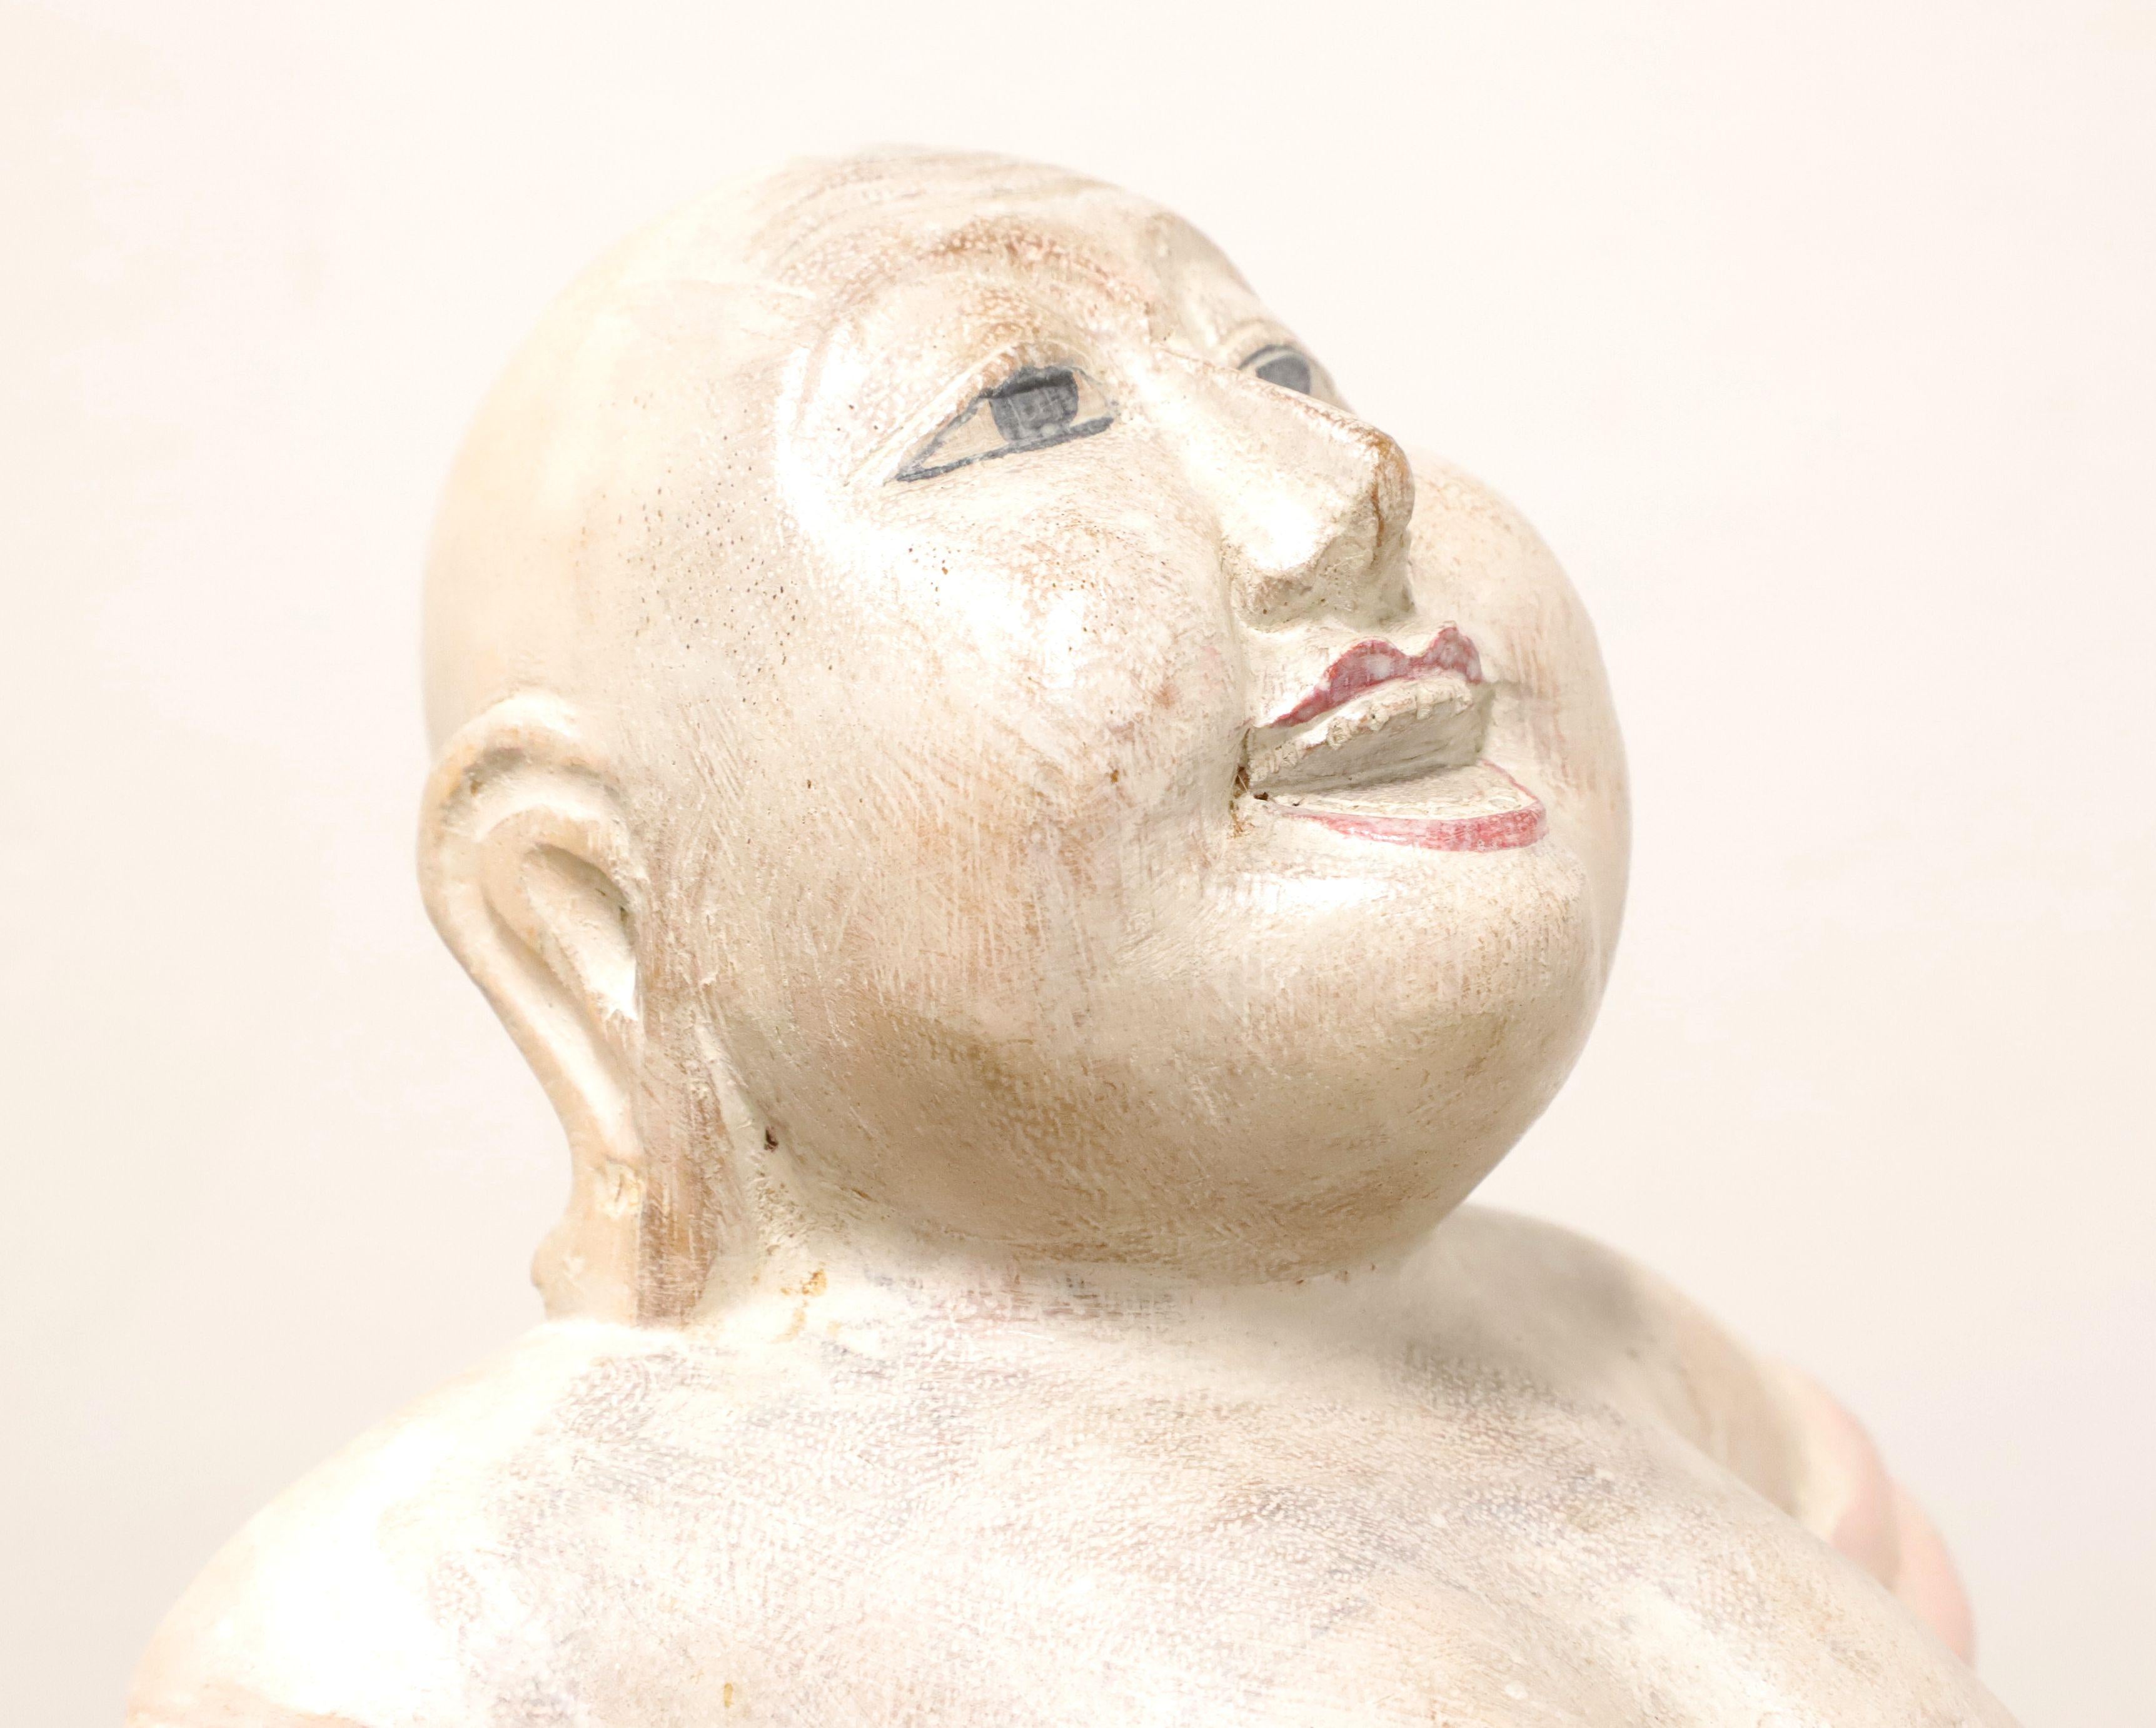 Mid 20th Century Carved Wood Smiling Buddha Figure Sculpture In Good Condition For Sale In Charlotte, NC